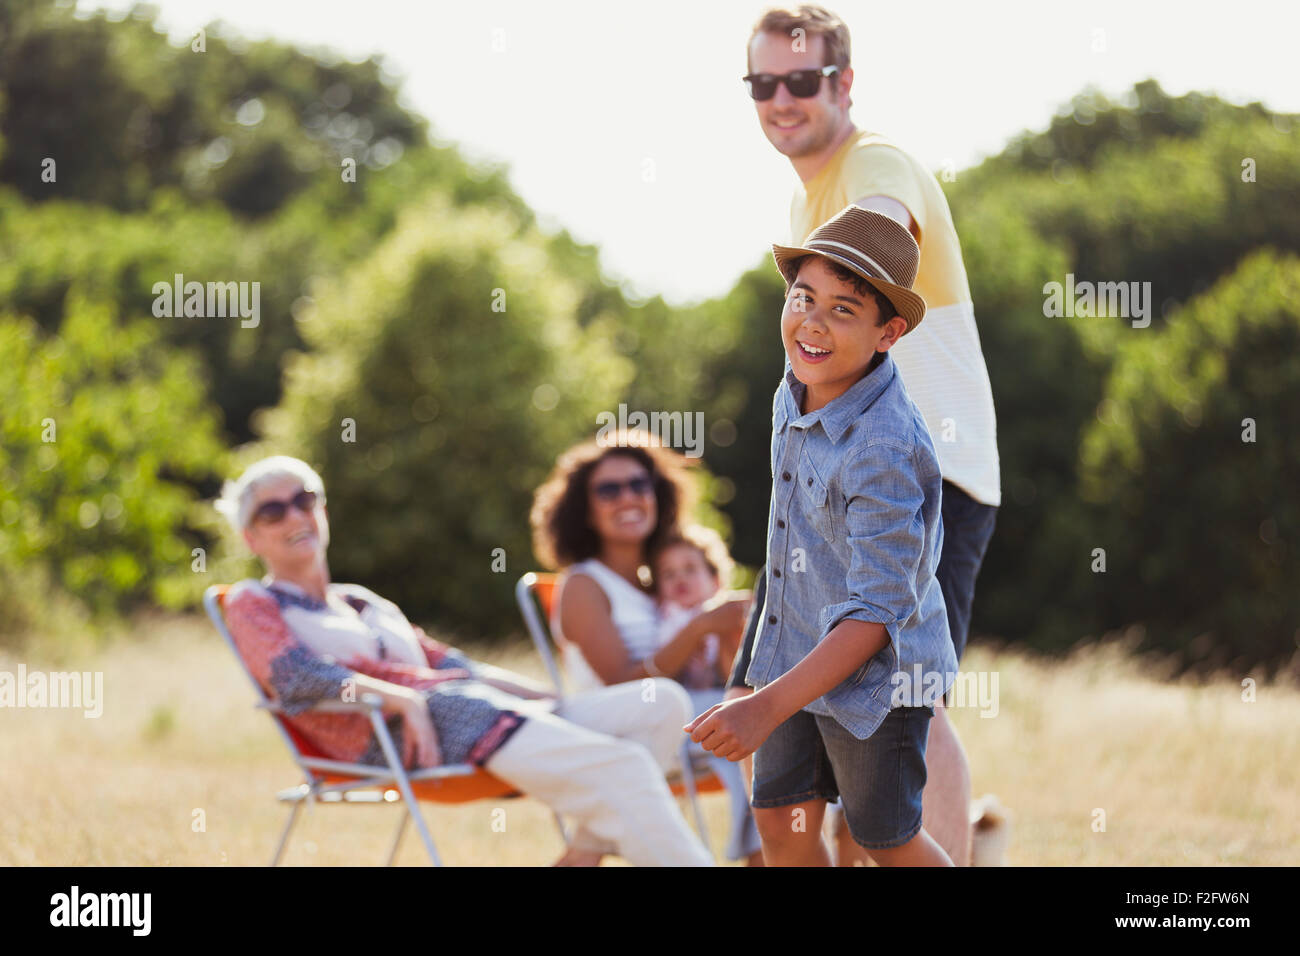 Portrait playful son pulling father in sunny field Stock Photo